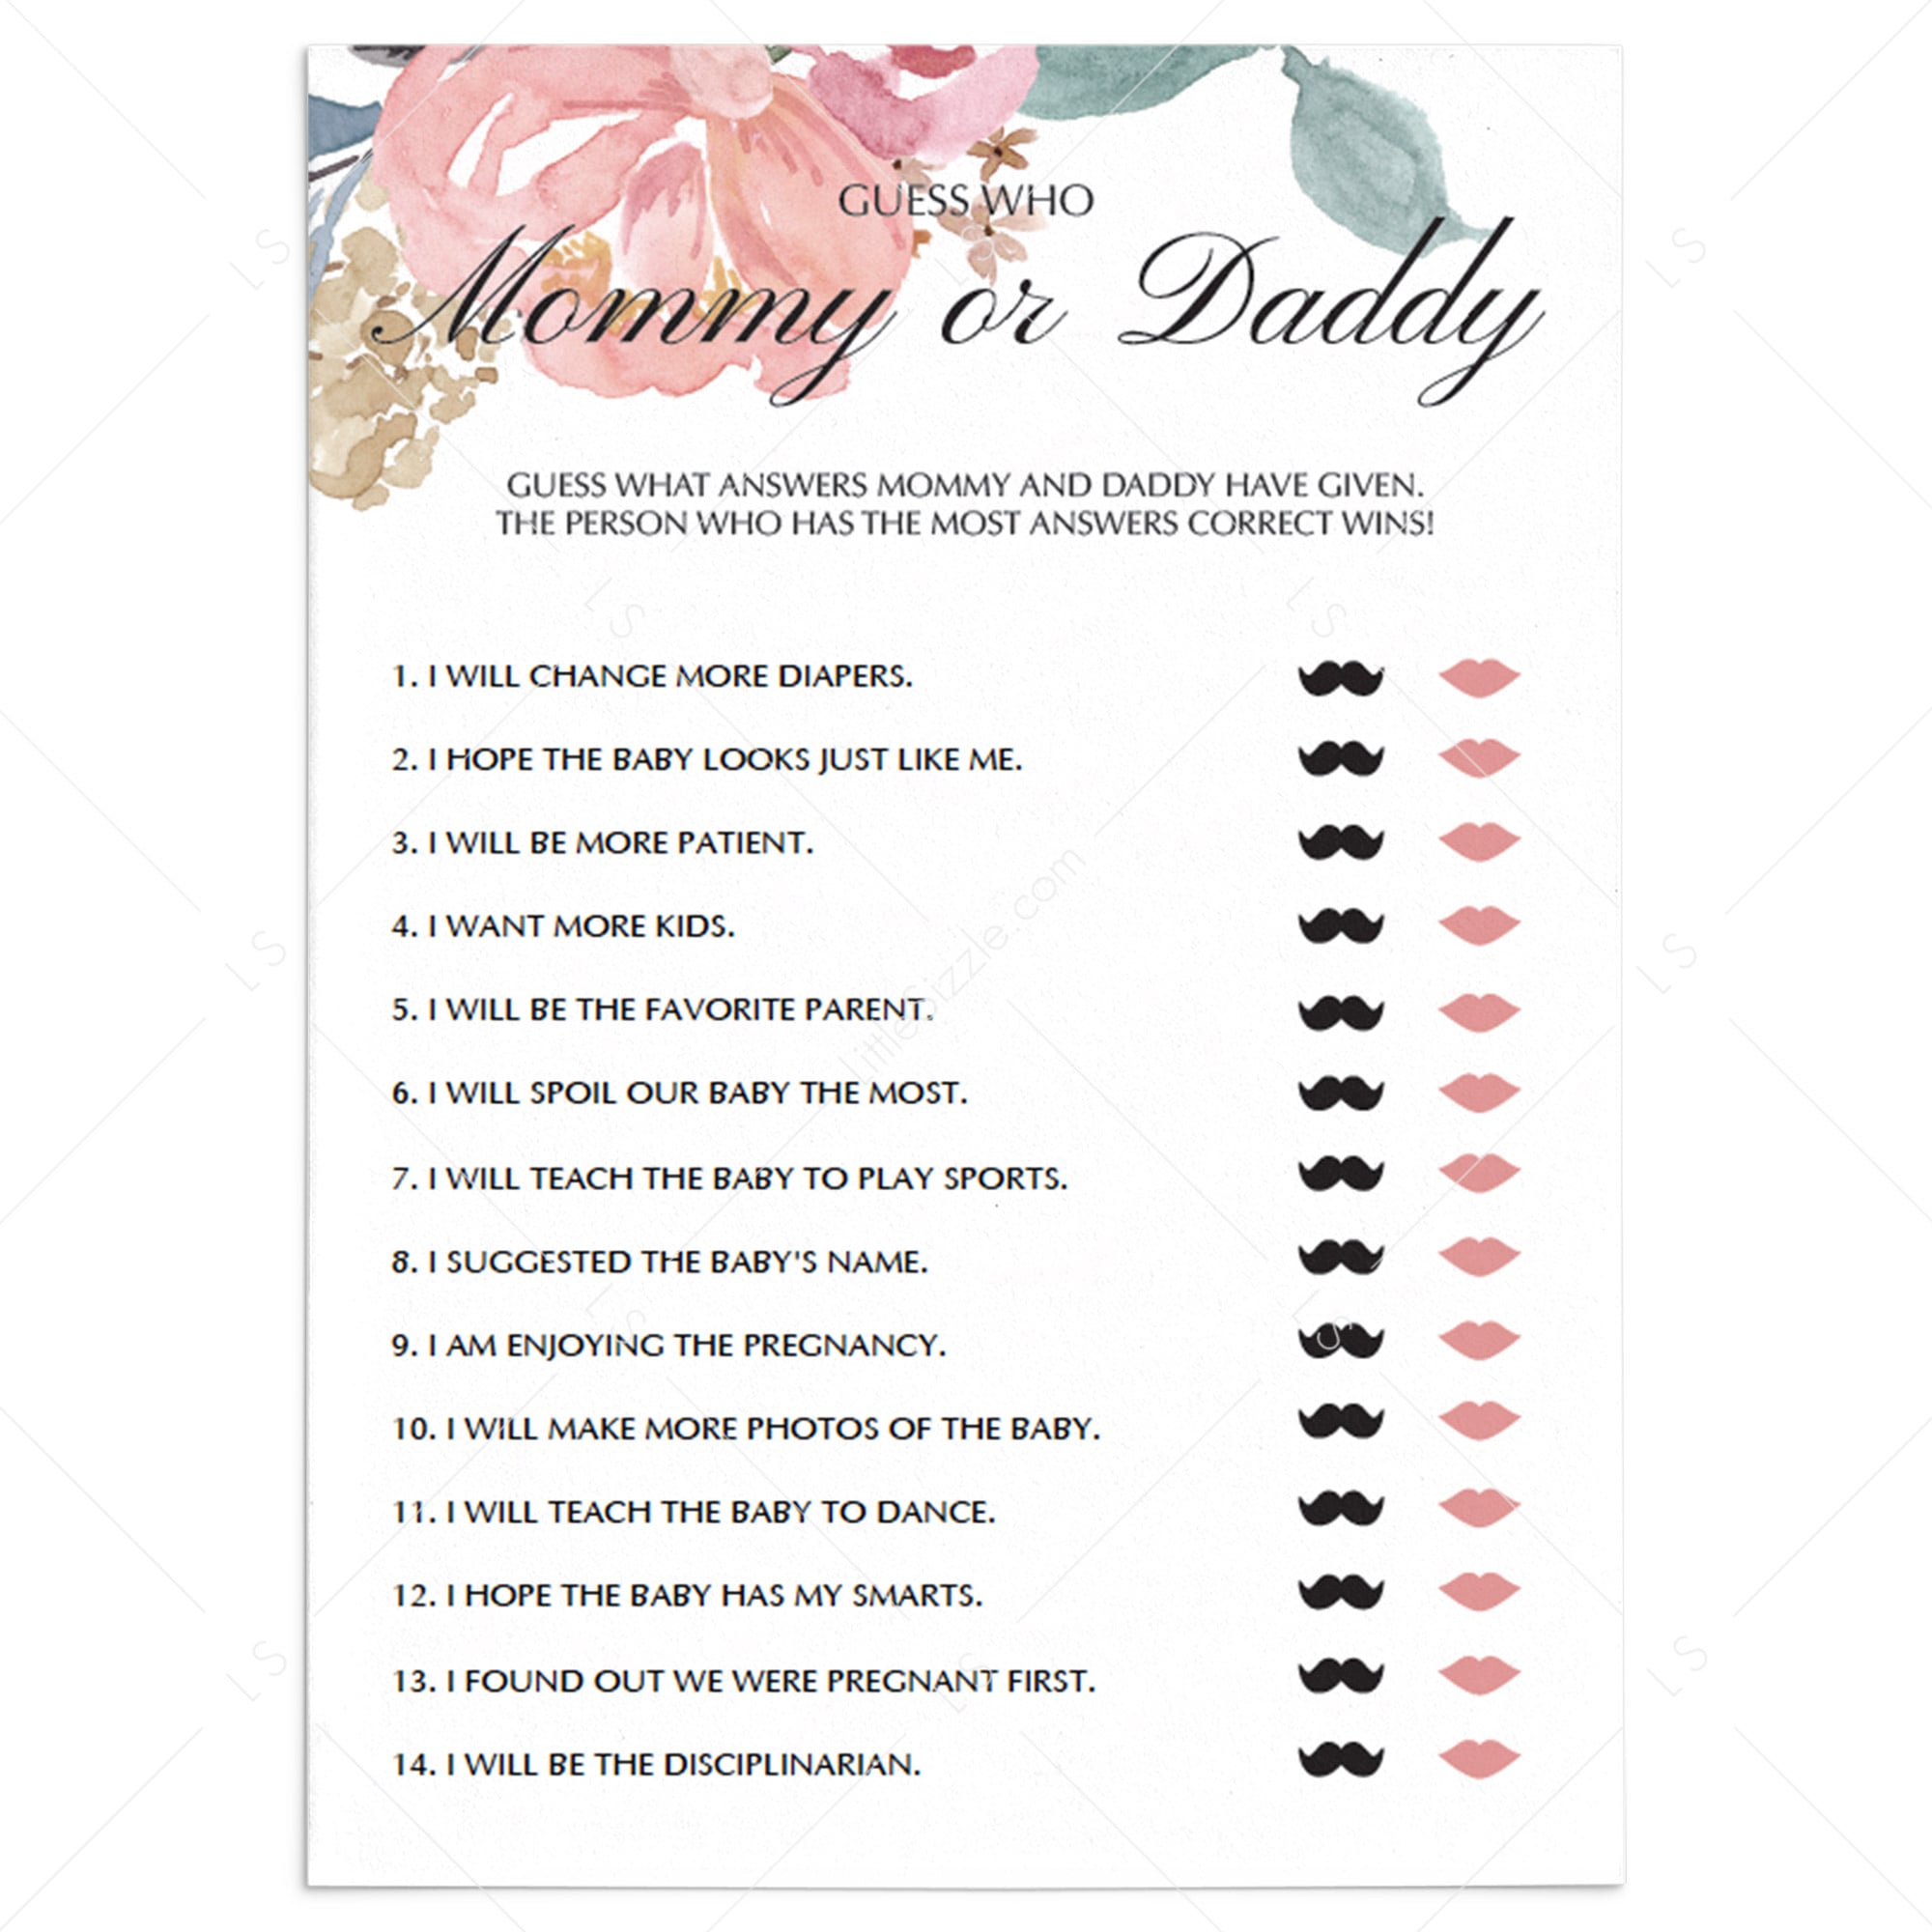 guess-who-mommy-or-daddy-baby-shower-game-instant-download-lupon-gov-ph